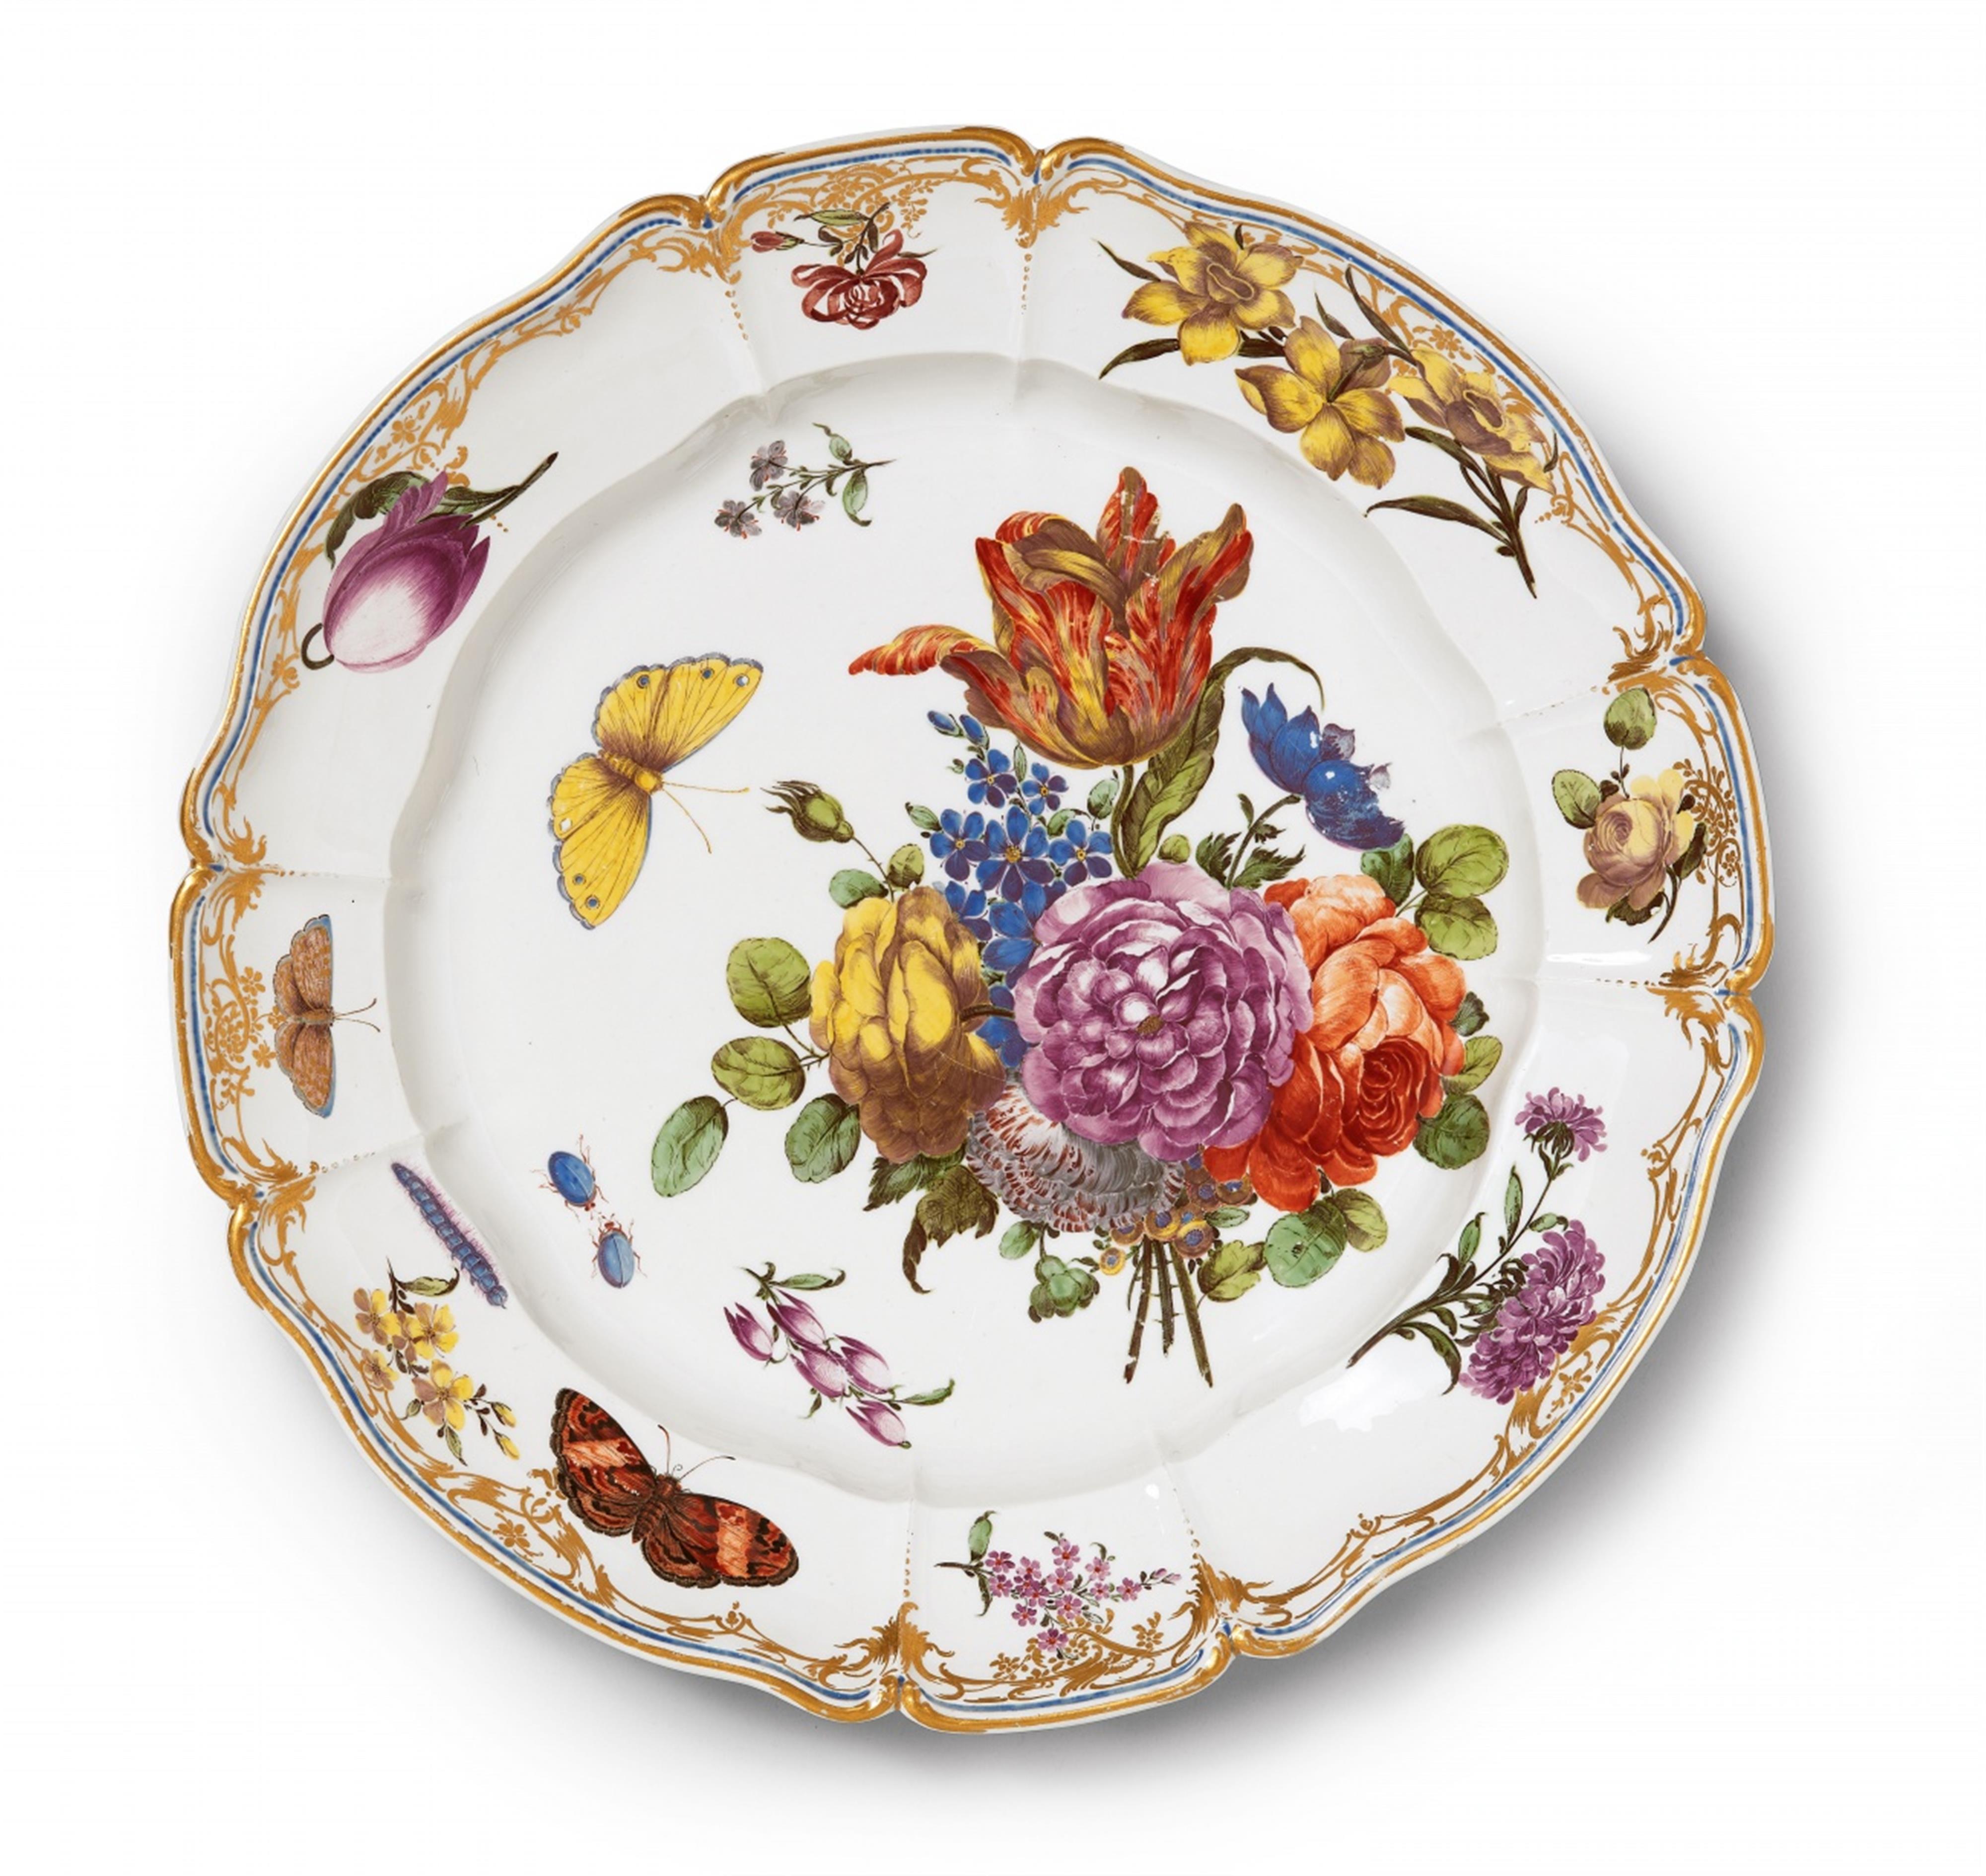 A magnificent Nymphenburg porcelain platter related to the court service - 